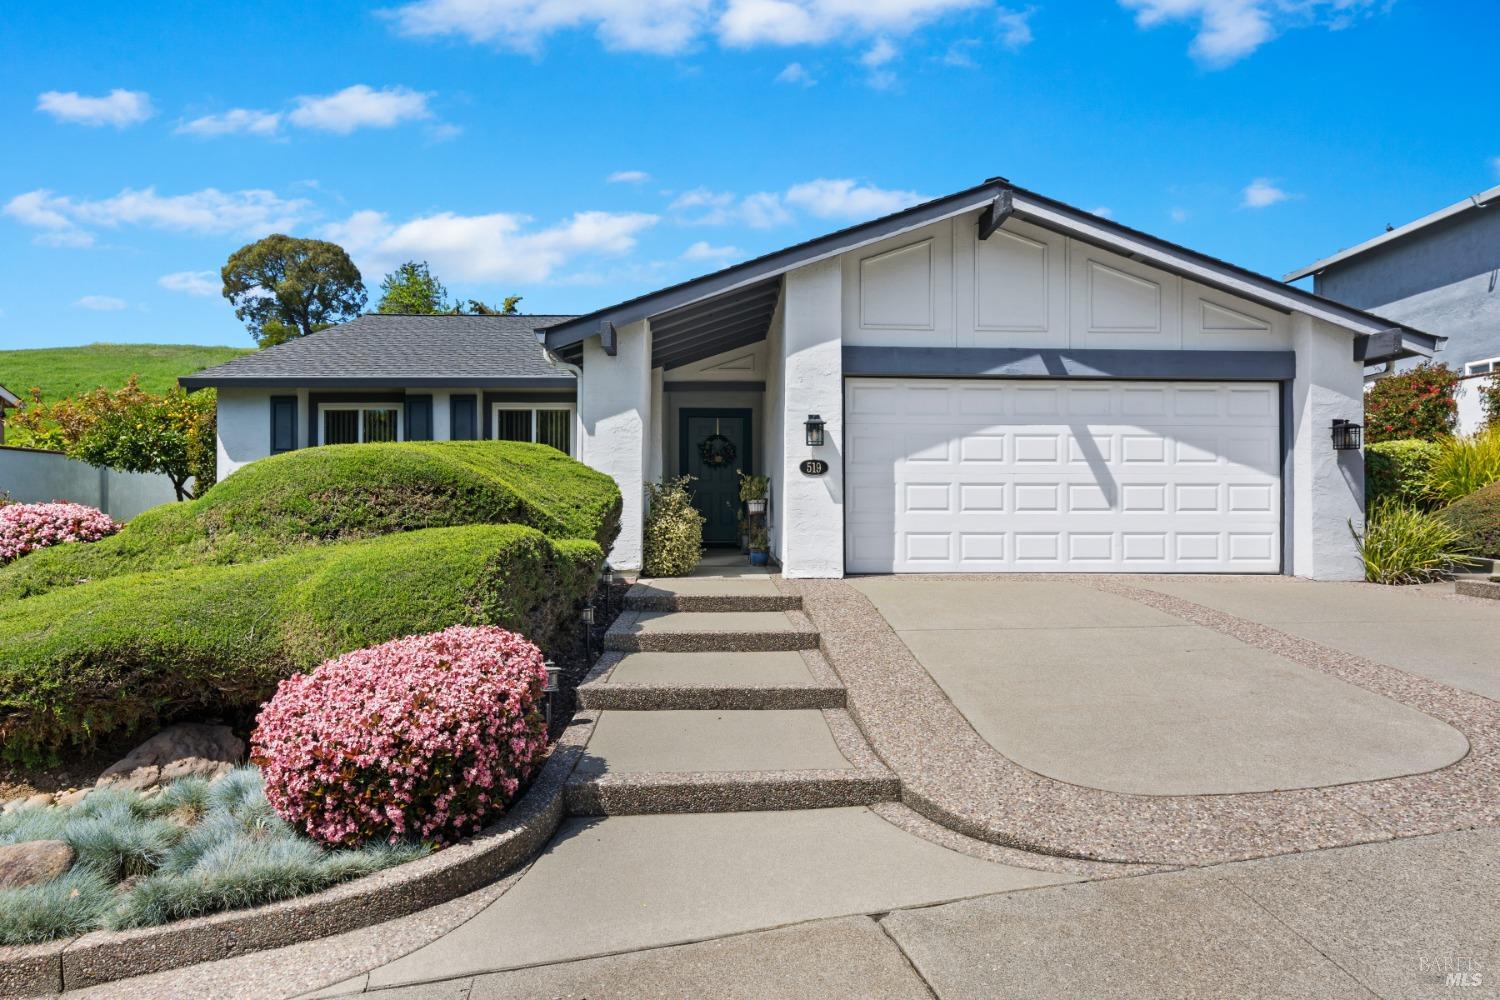 Welcome to 519 Hastings Dr, Benicia!  This Single Story home has 3 bedrooms and 2 bathrooms with 136